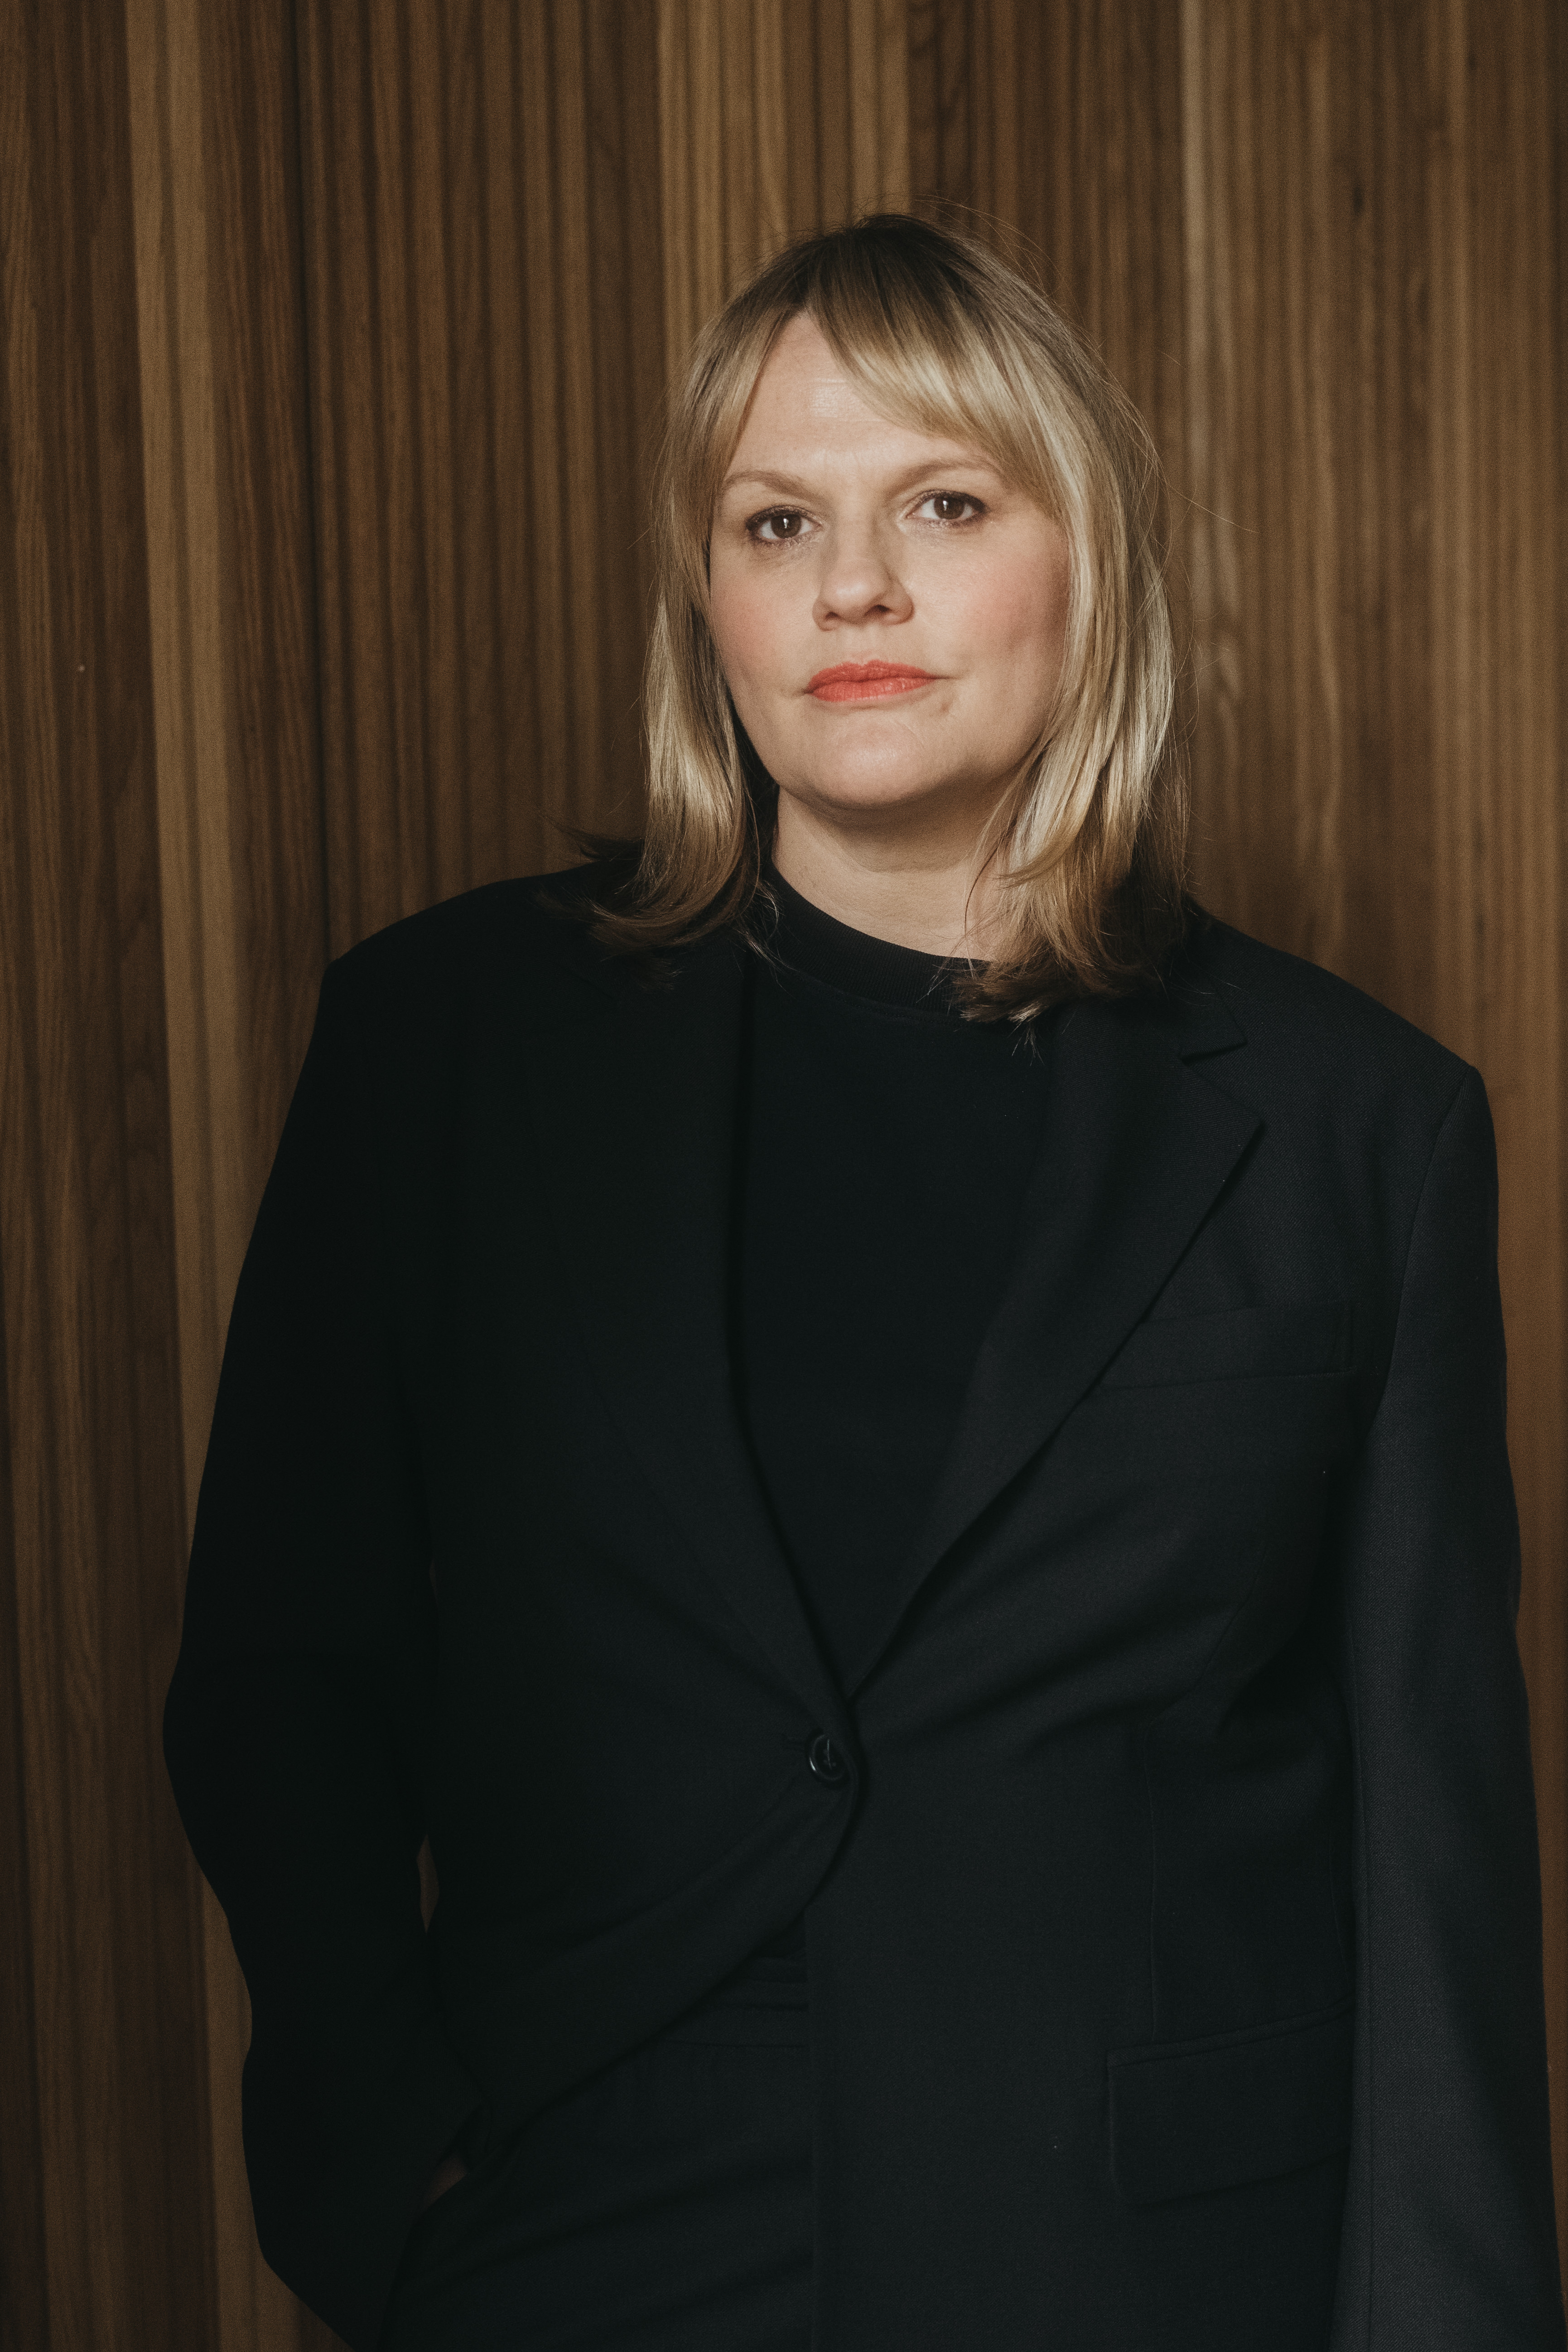 A woman with shoulder length blonde hair, wearing a black suit